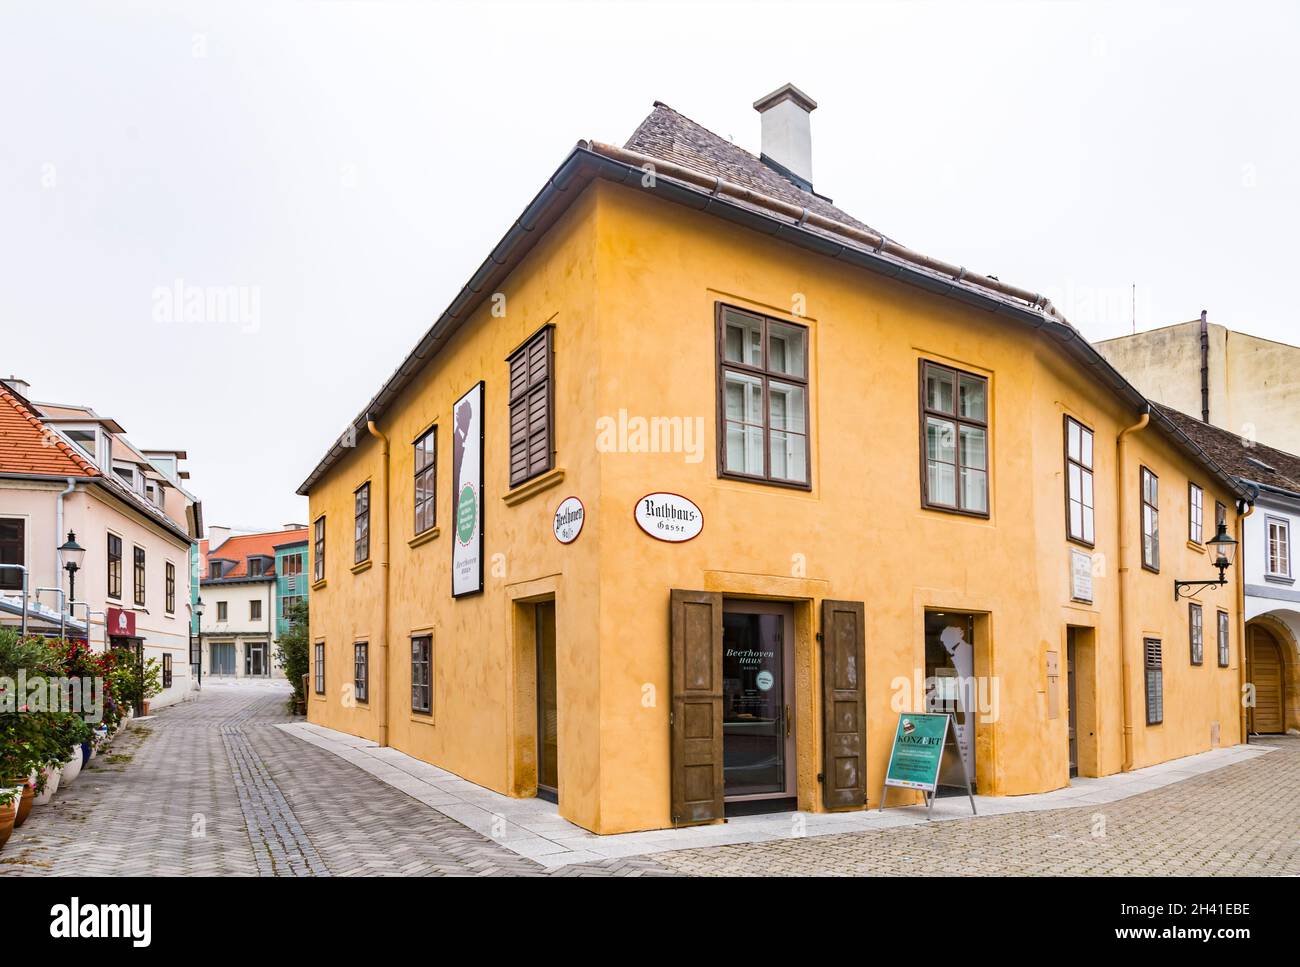 Beethoven house museum in the center of Baden bei Wien. Vienna Woods, Lower Austria. Stock Photo